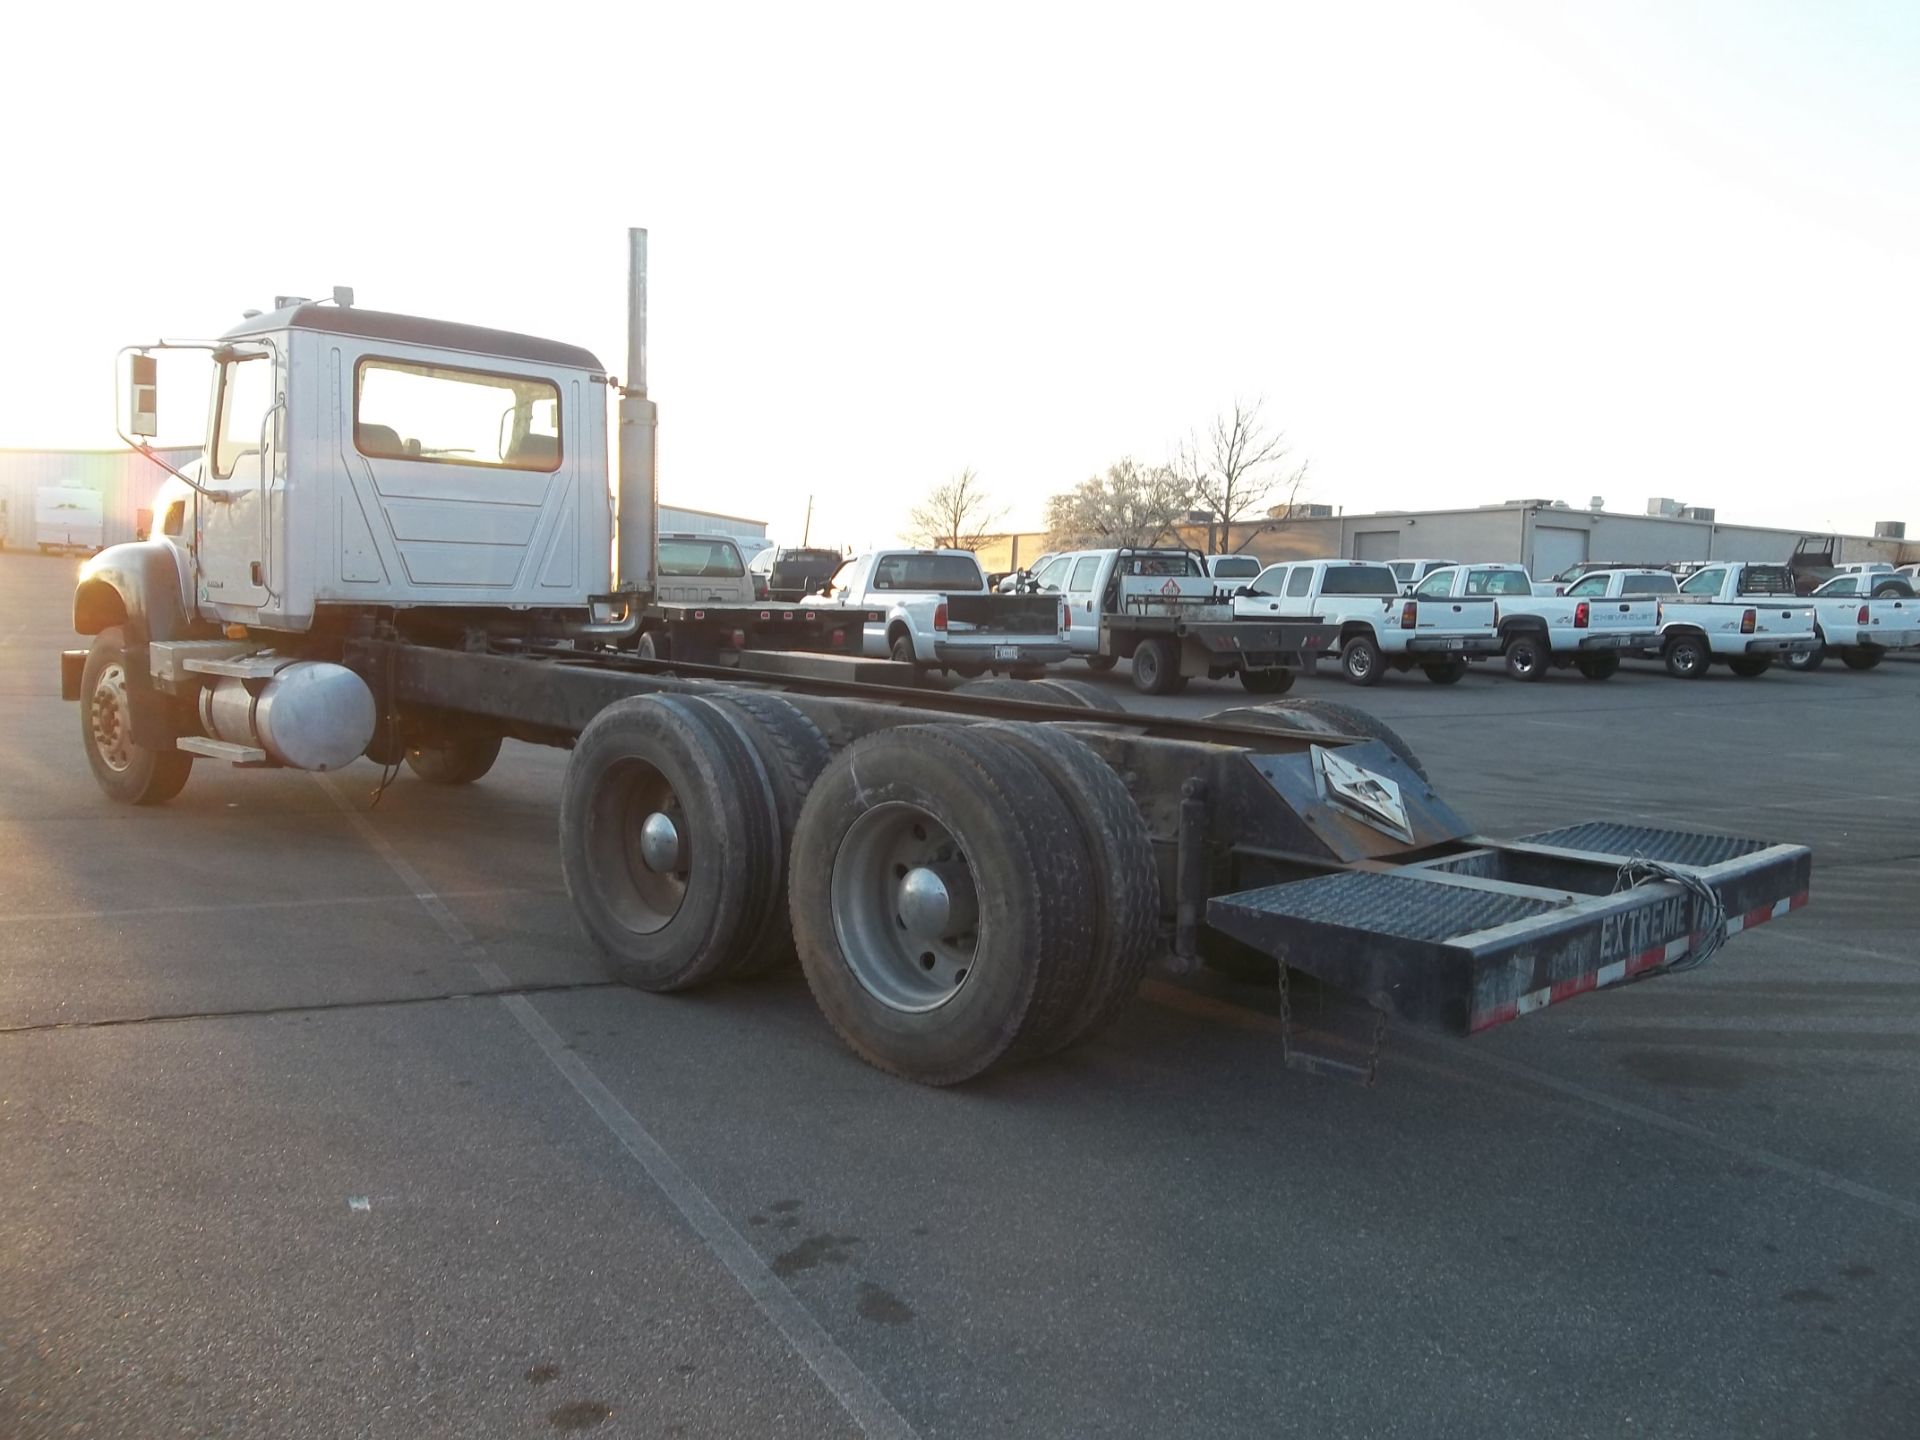 2008 Mack CV713 Cab & Chassis Truck, s/n 1m2ag11c08m070709,Mack E7 eng, 8 spd trans, od reads 170544 - Image 3 of 6